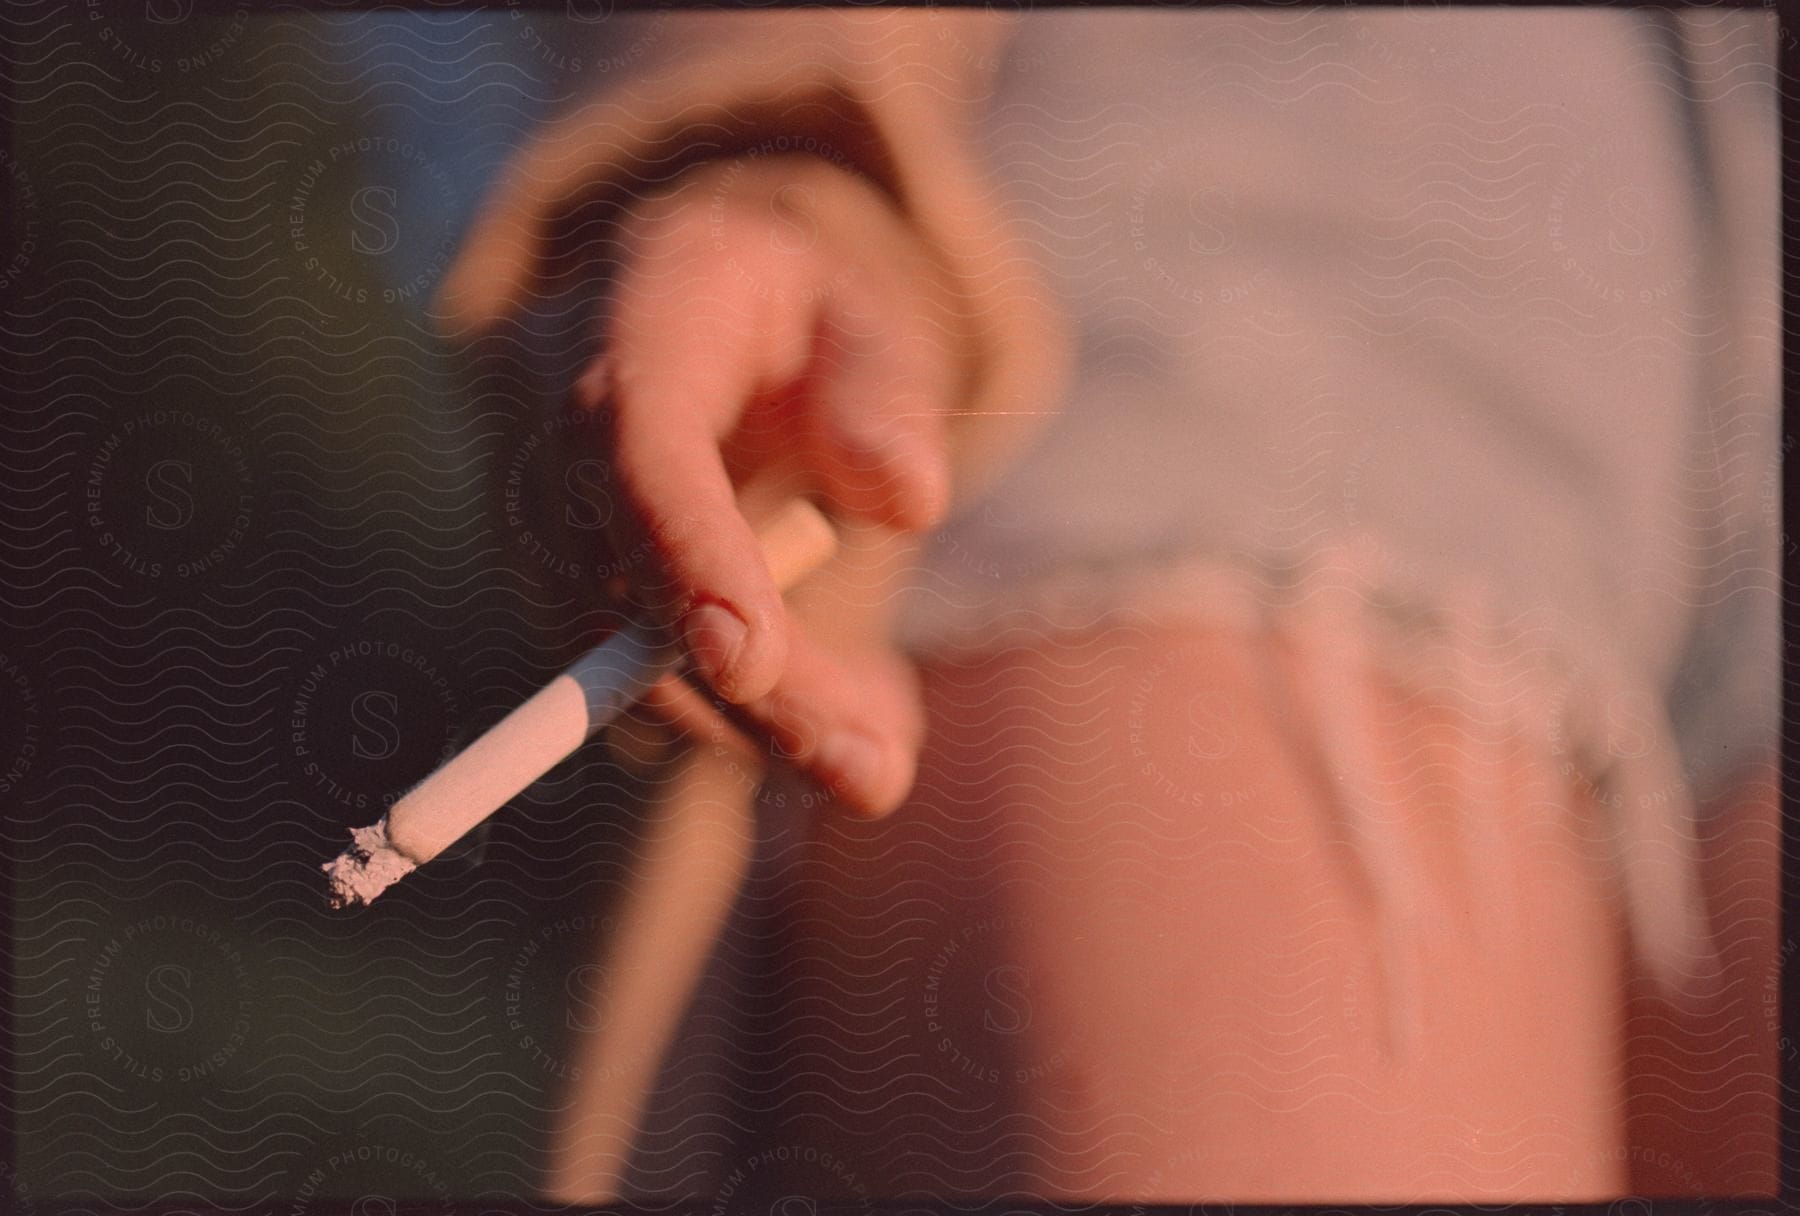 A woman wearing denim shorts shakes ash off a cigarette between her fingers